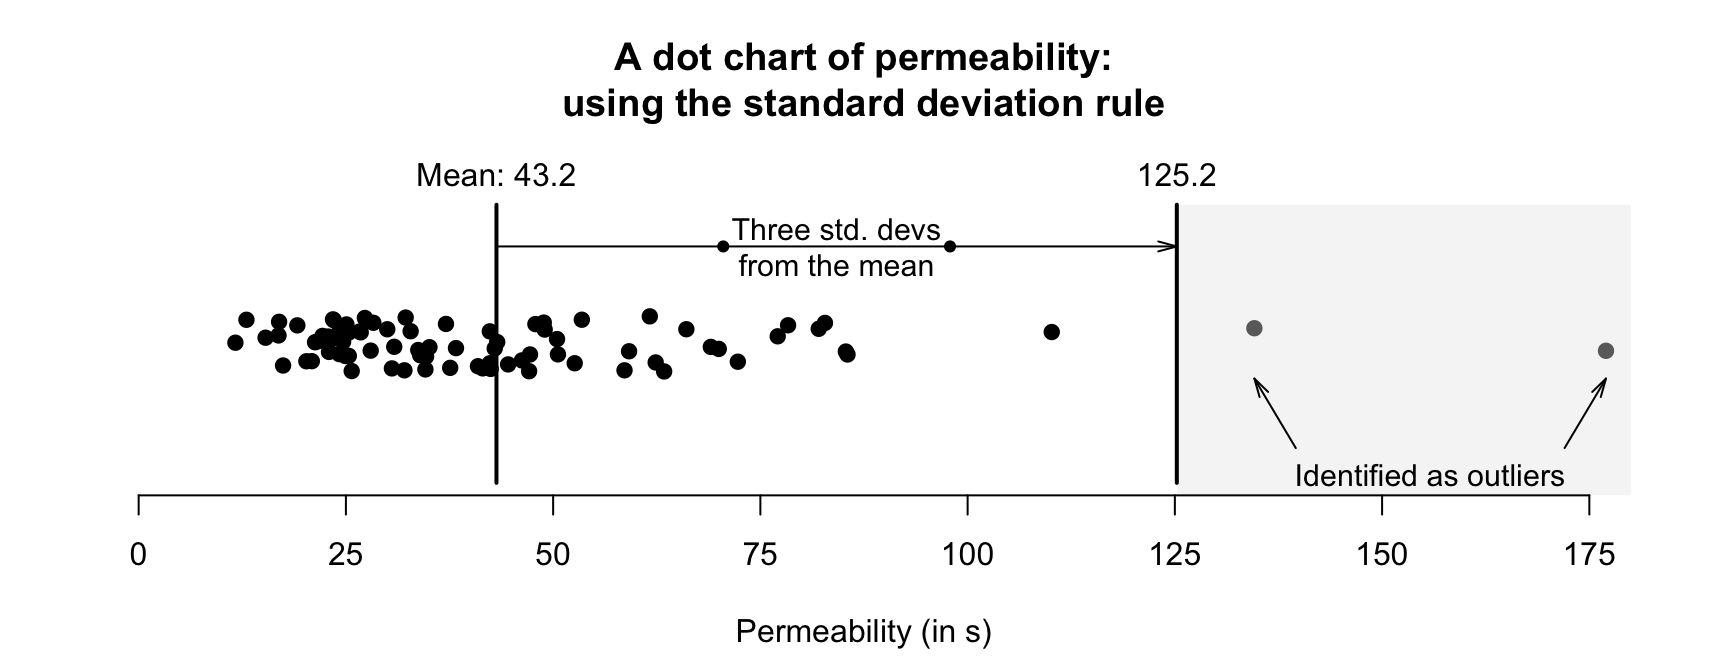 Outliers identified using the standard deviation rule for the permeability data